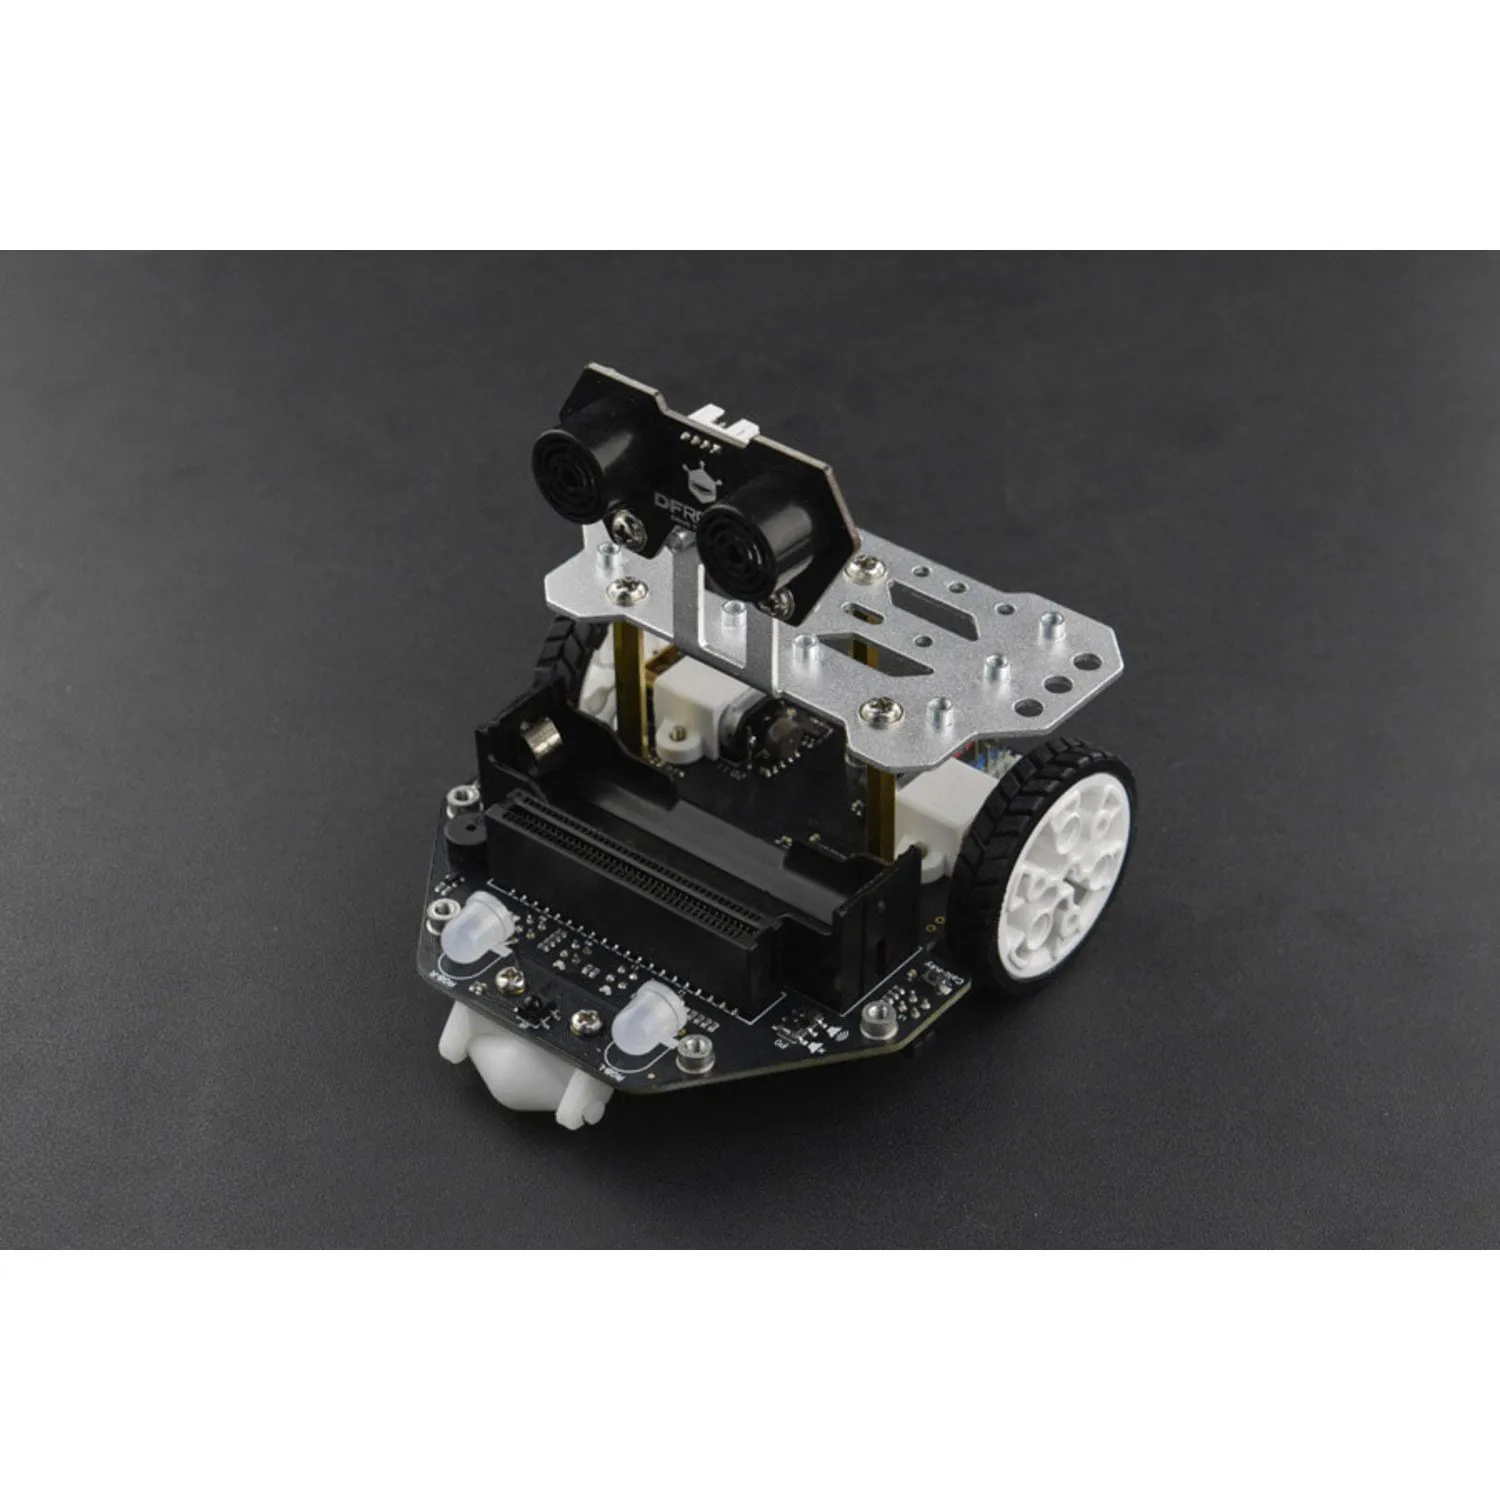 Photo of micro:Maqueen Plus - an Advanced STEM Education Robot for micro:bit